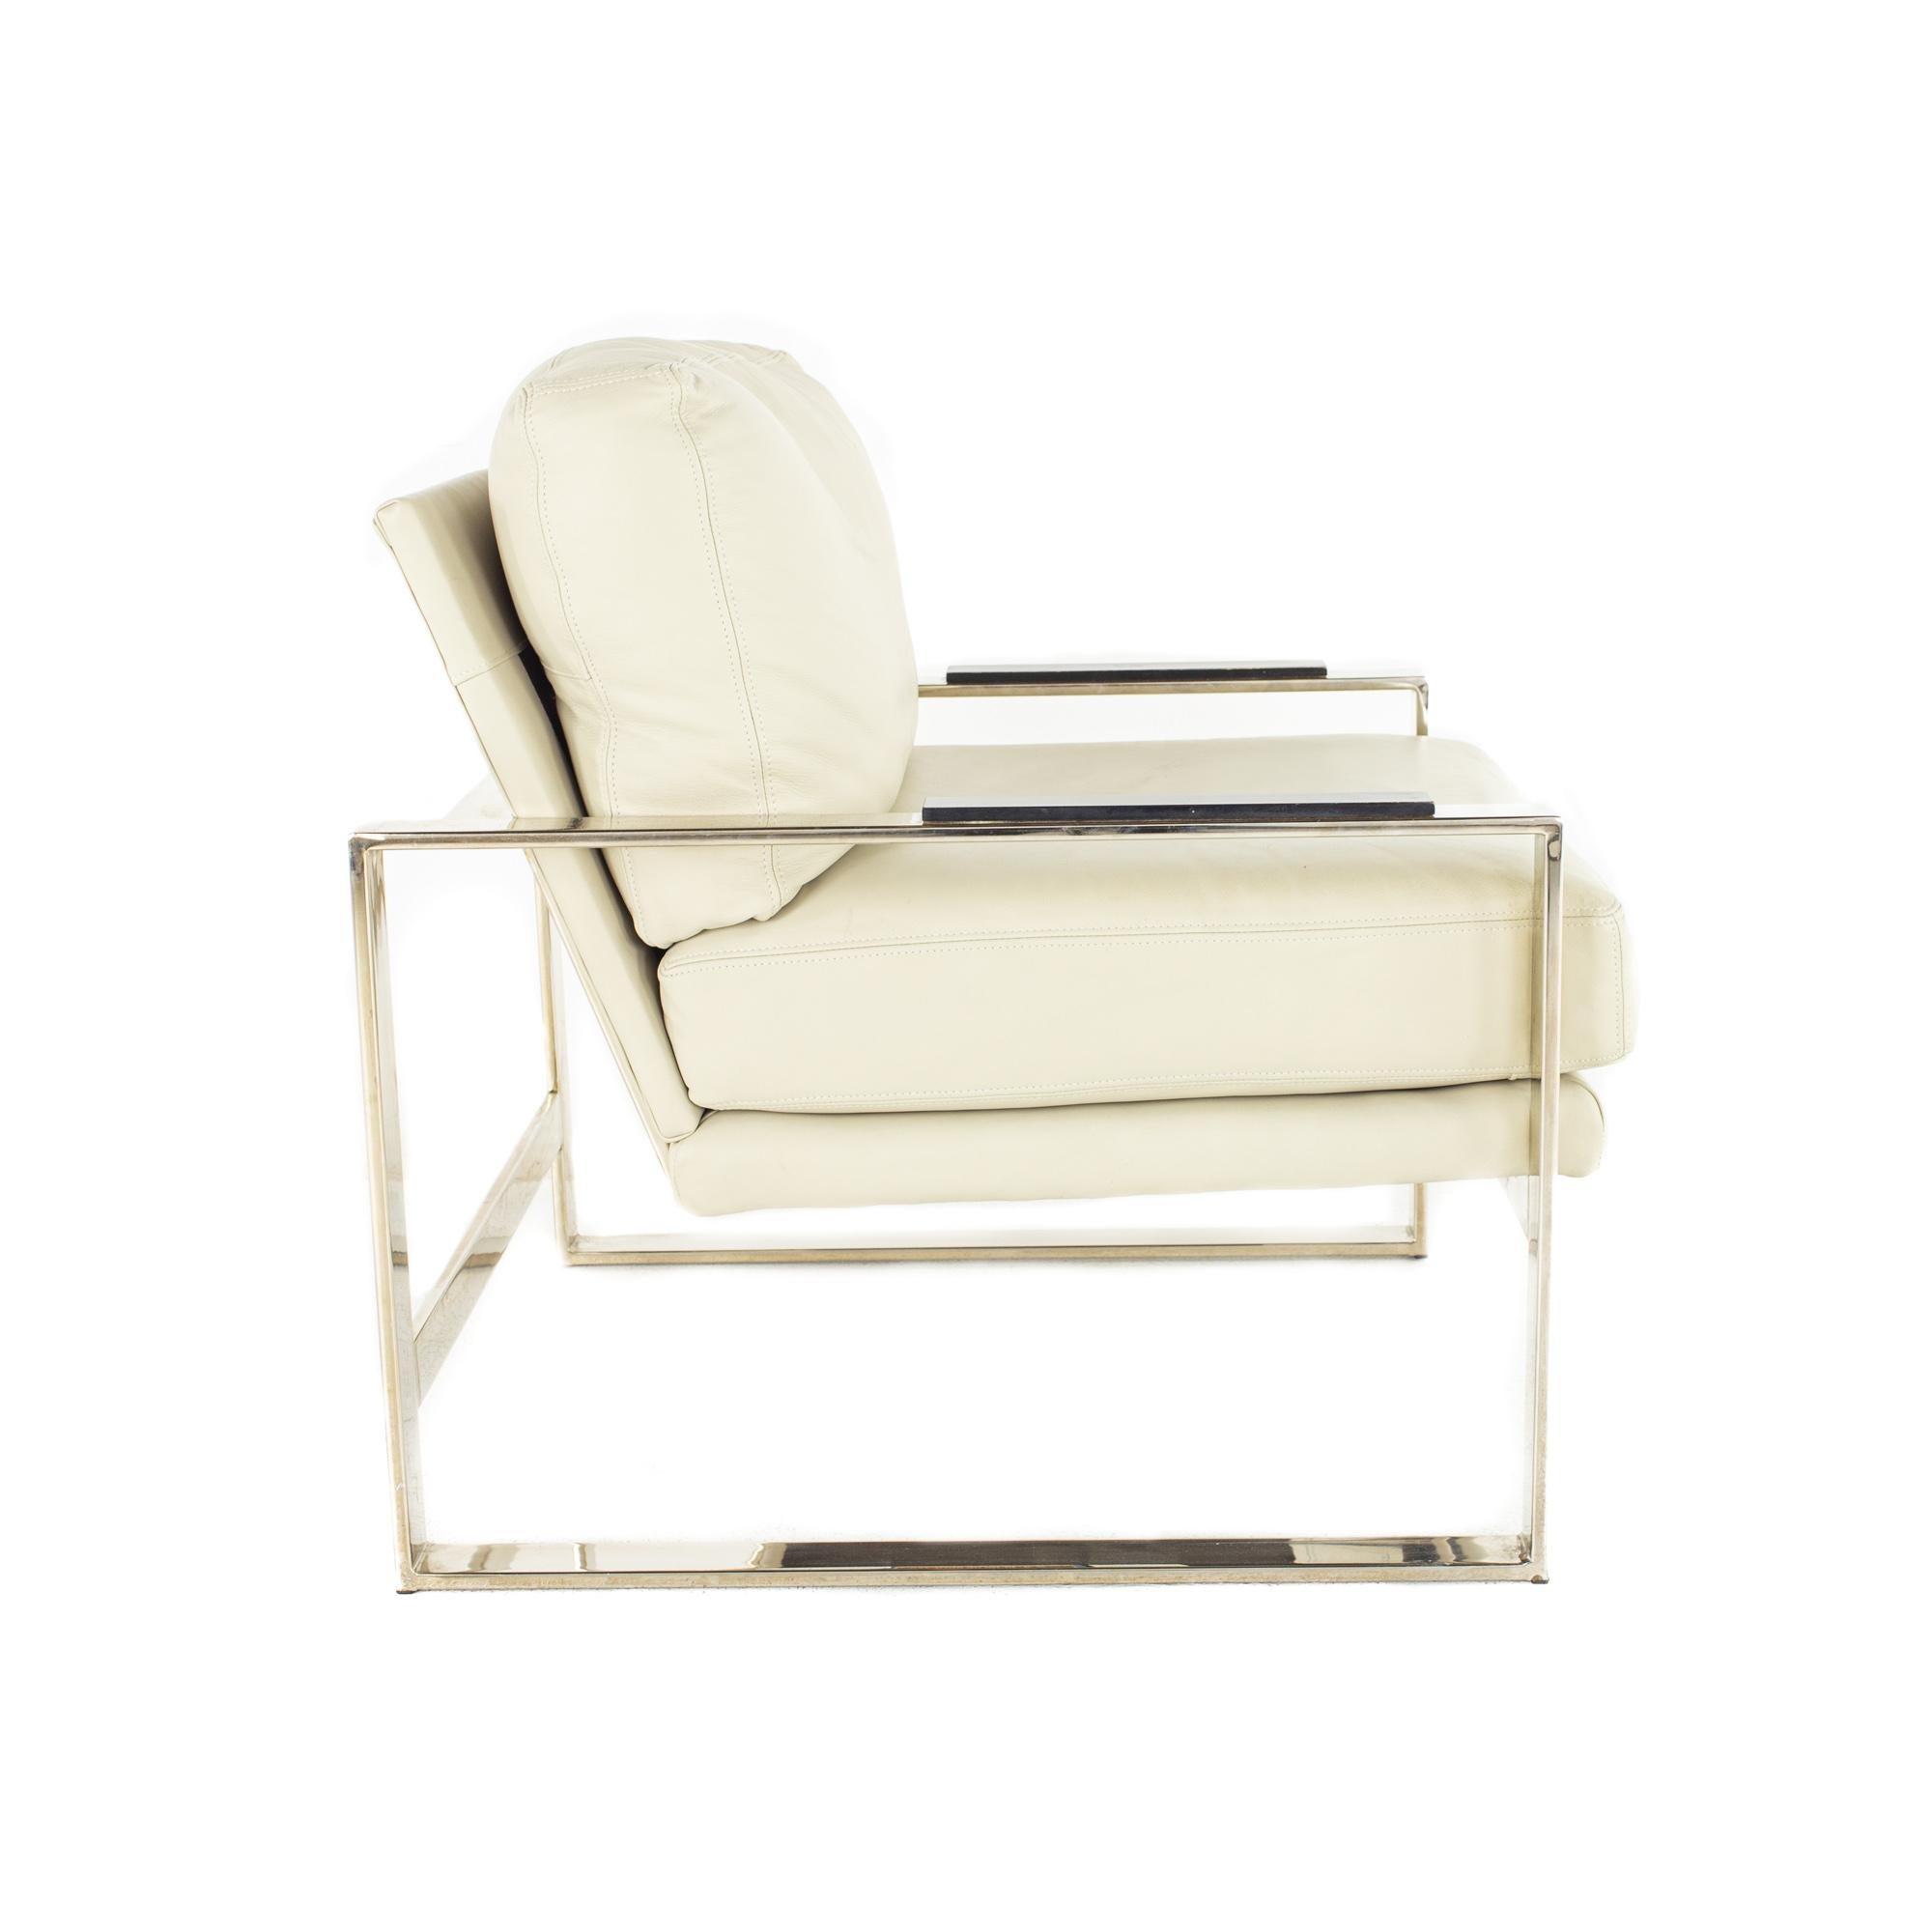 Milo Baughman Syle Mid Century Chrome and Leather Flatbar Lounge Chair In Good Condition For Sale In Countryside, IL